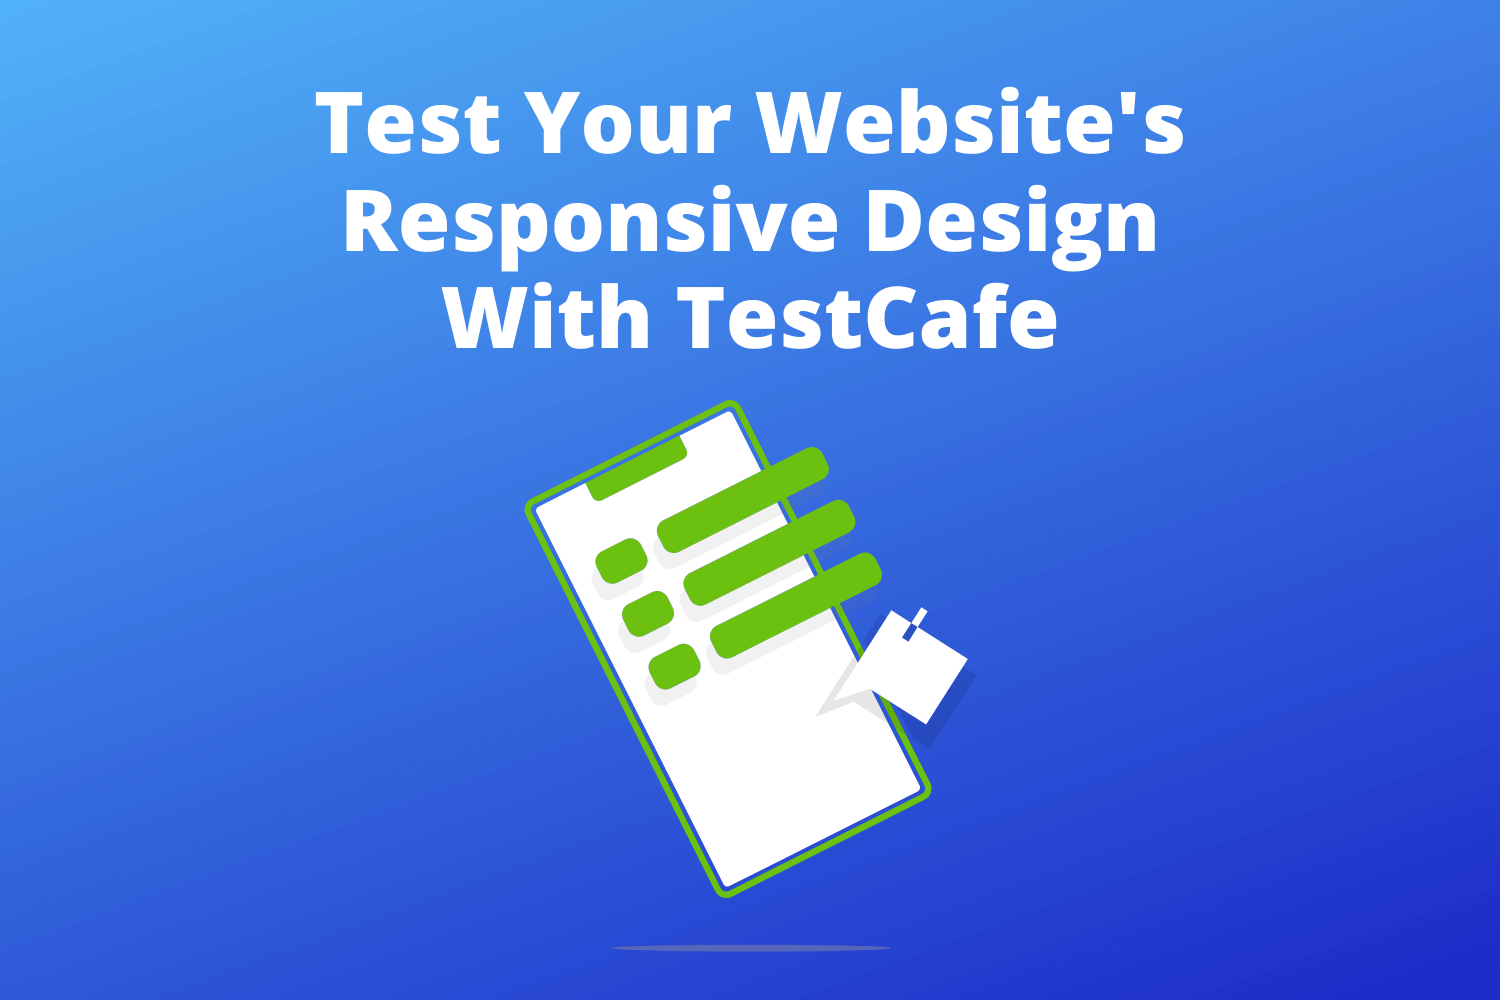 Test Your Website's Responsive Design With TestCafe